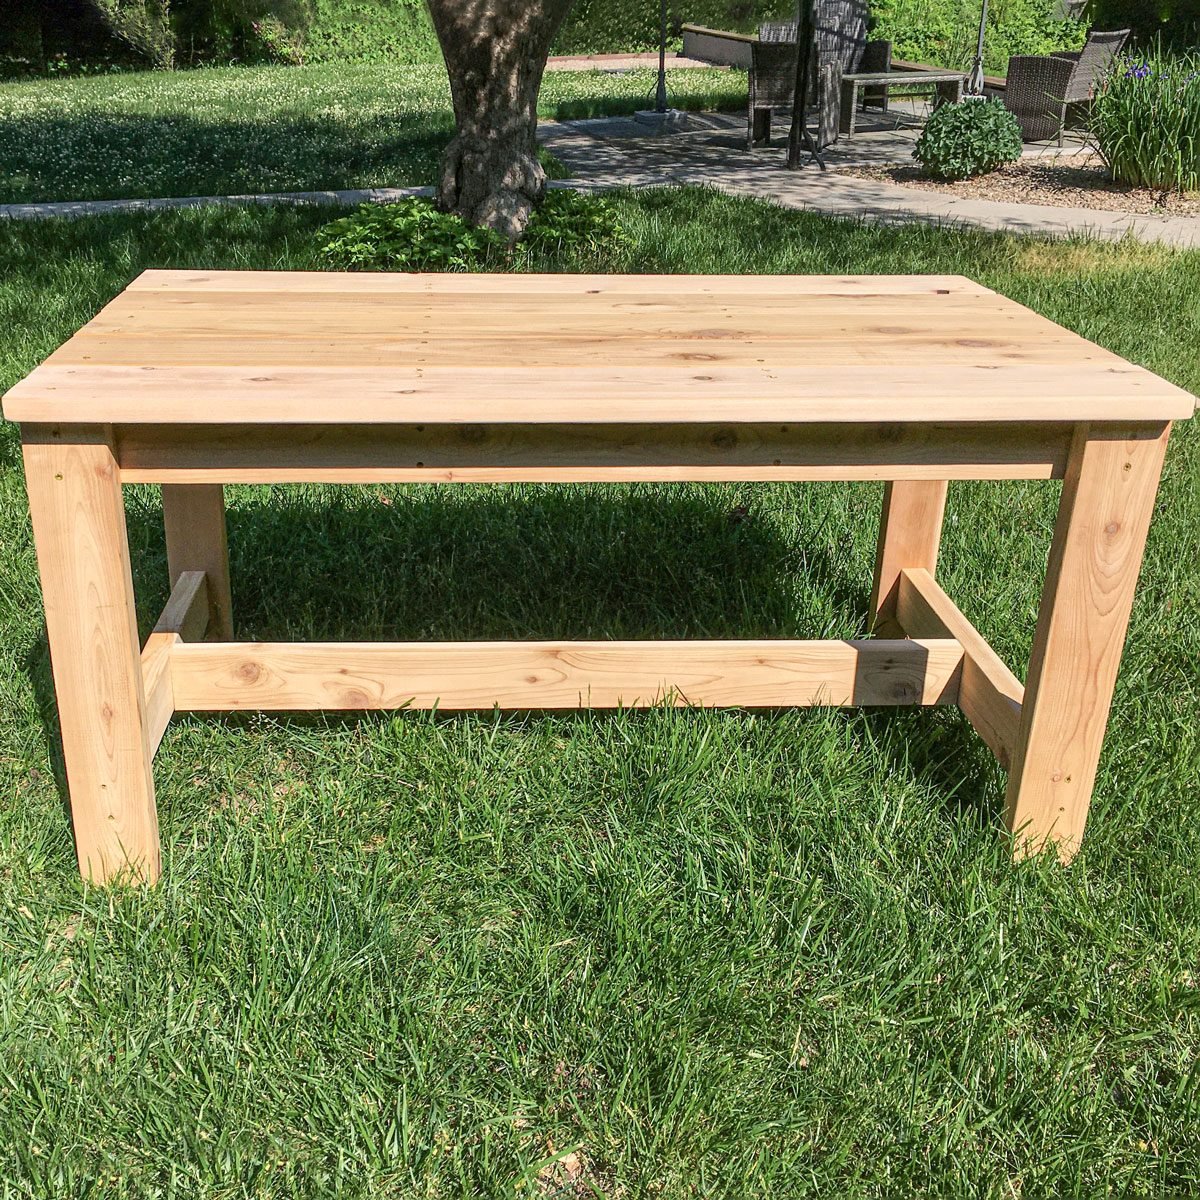 How to Make an Outdoor Table for Kids